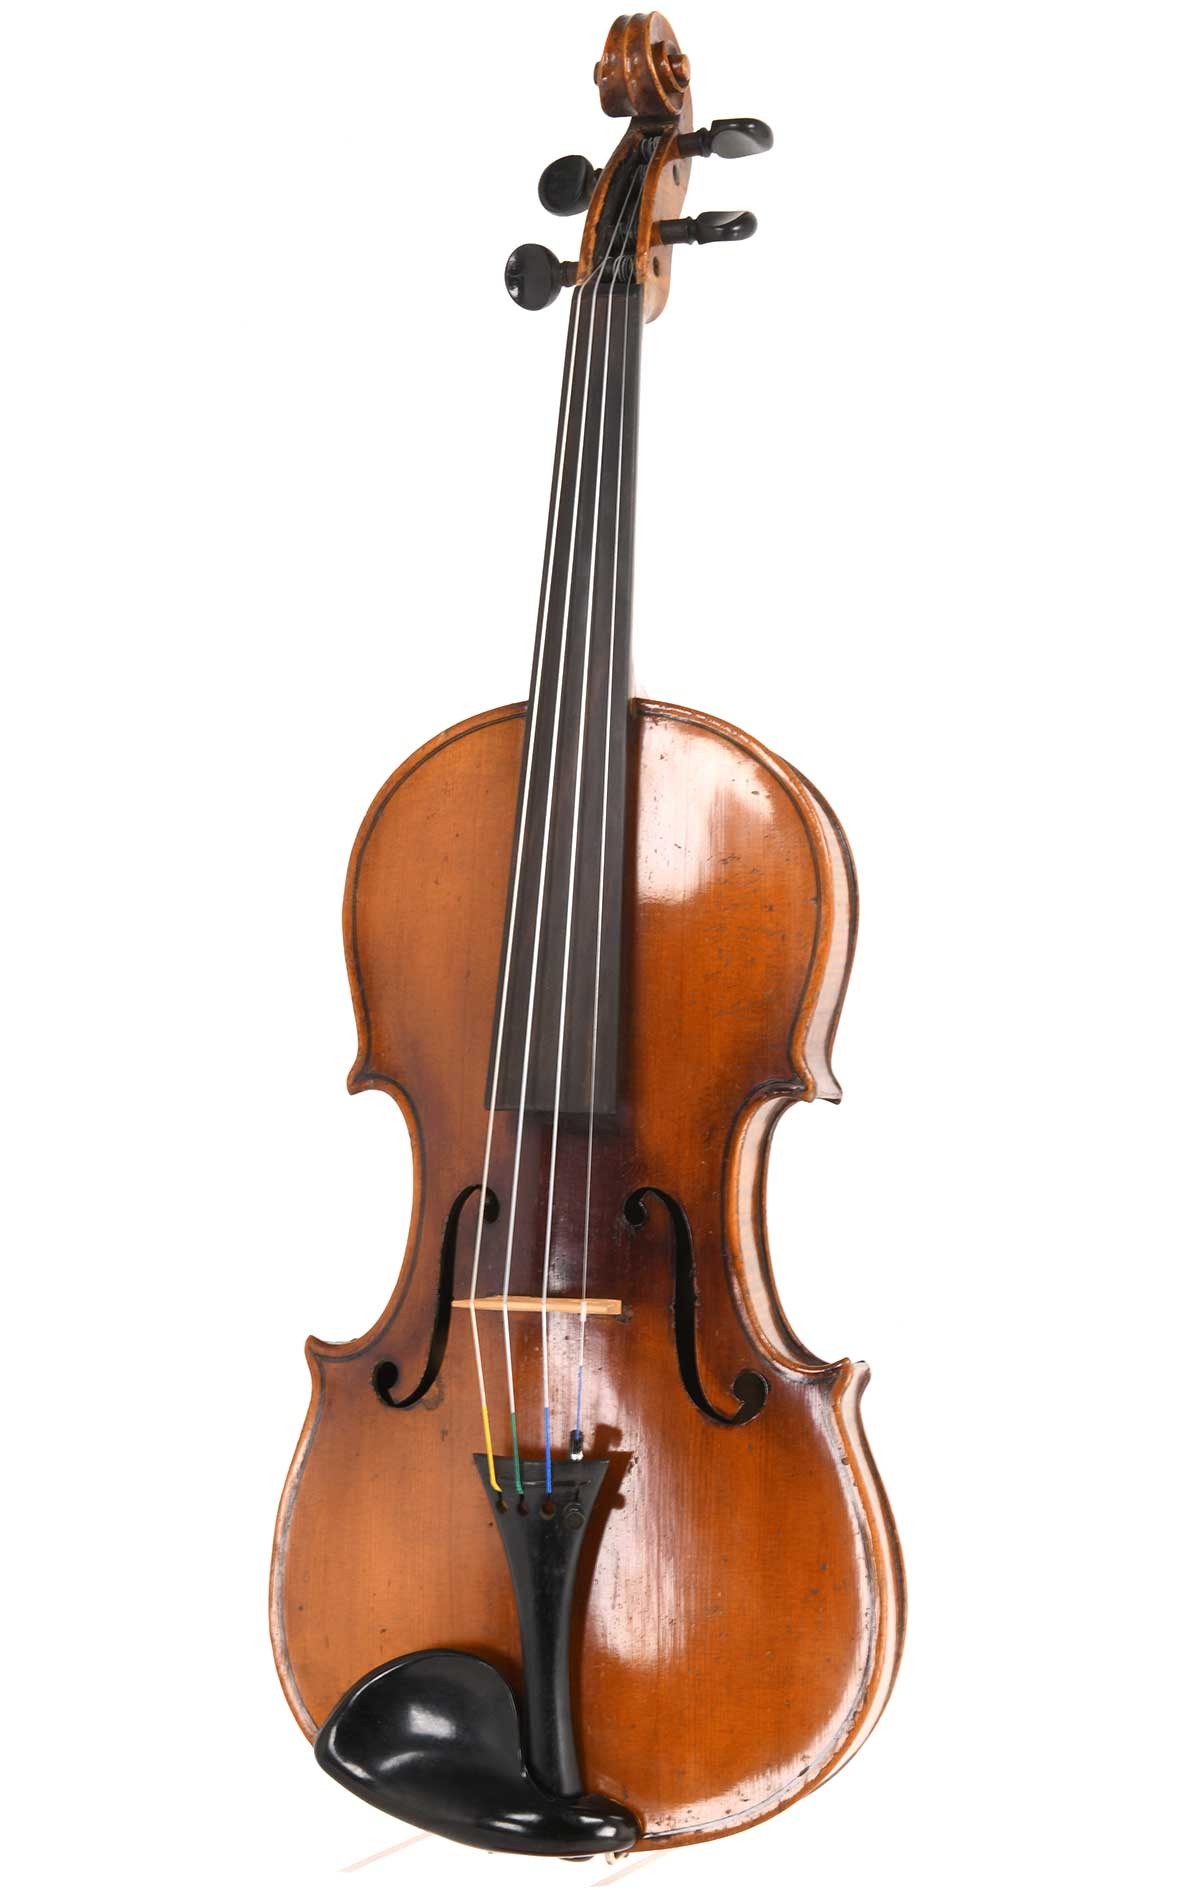 Antique violin from Saxony, Germany 1920's